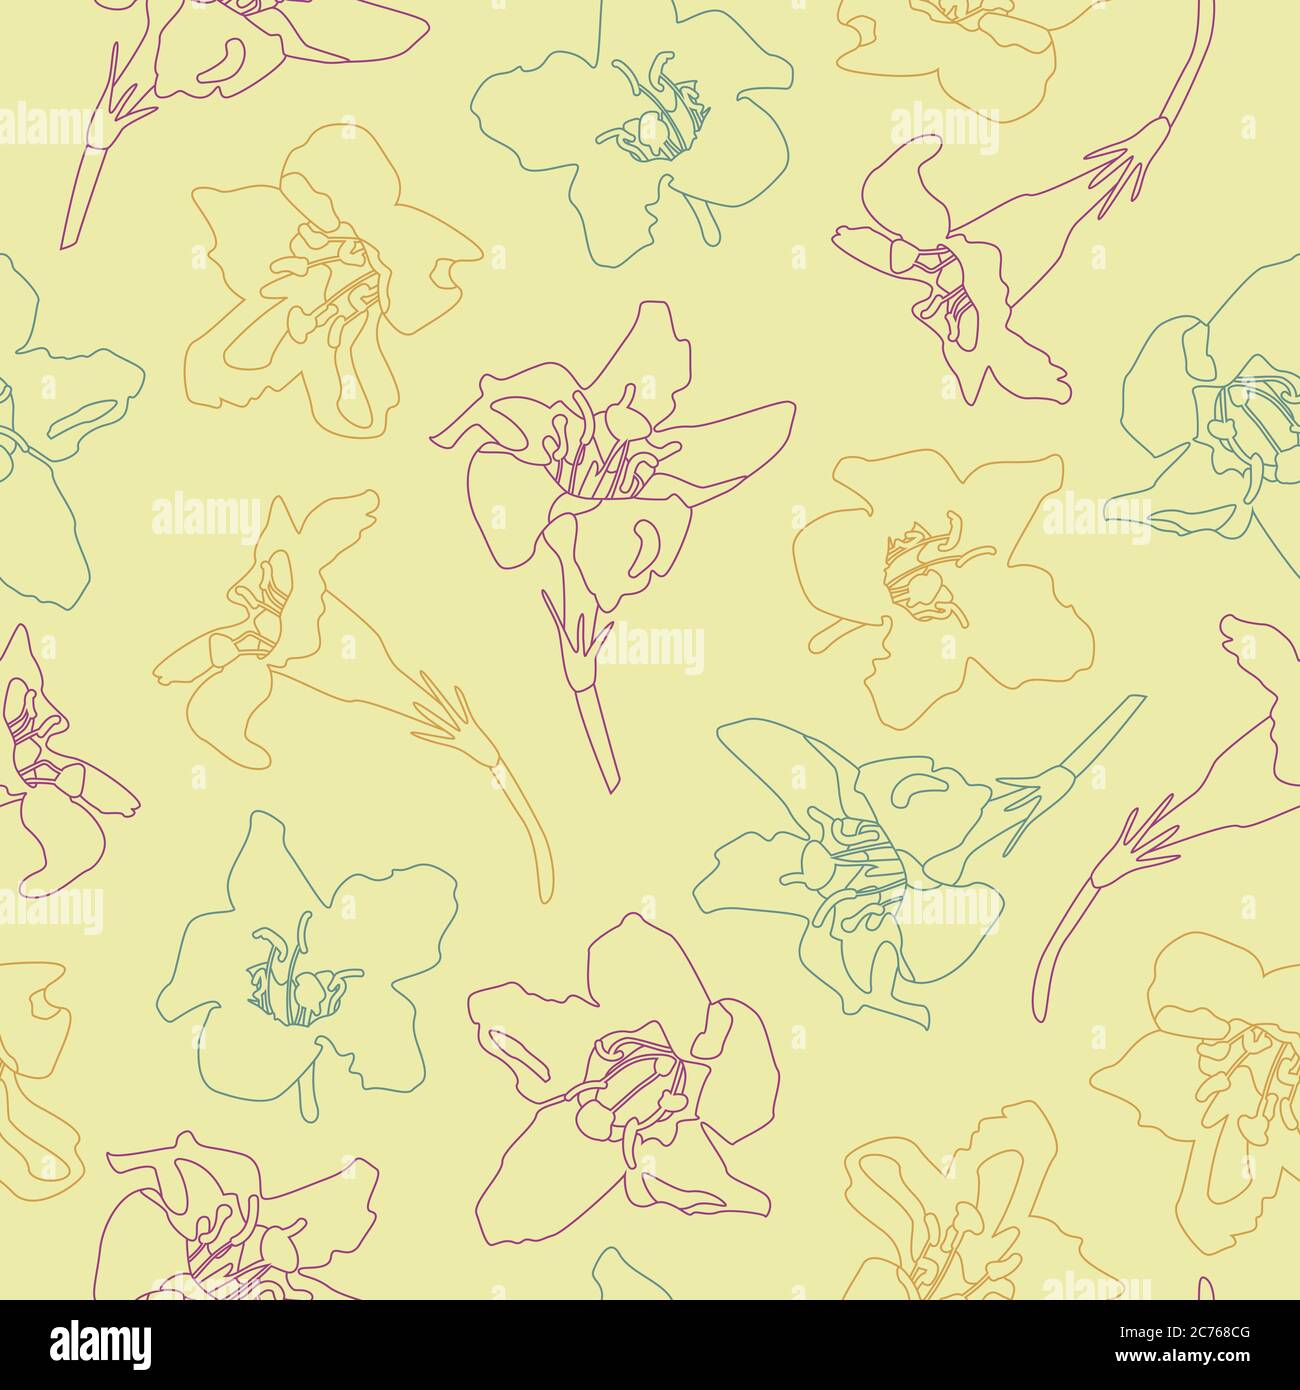 Seamless pattern of abstract flowers and herbs on a light background. Abstract botanical vector illustration. Perfect design for textile or print. Stock Vector